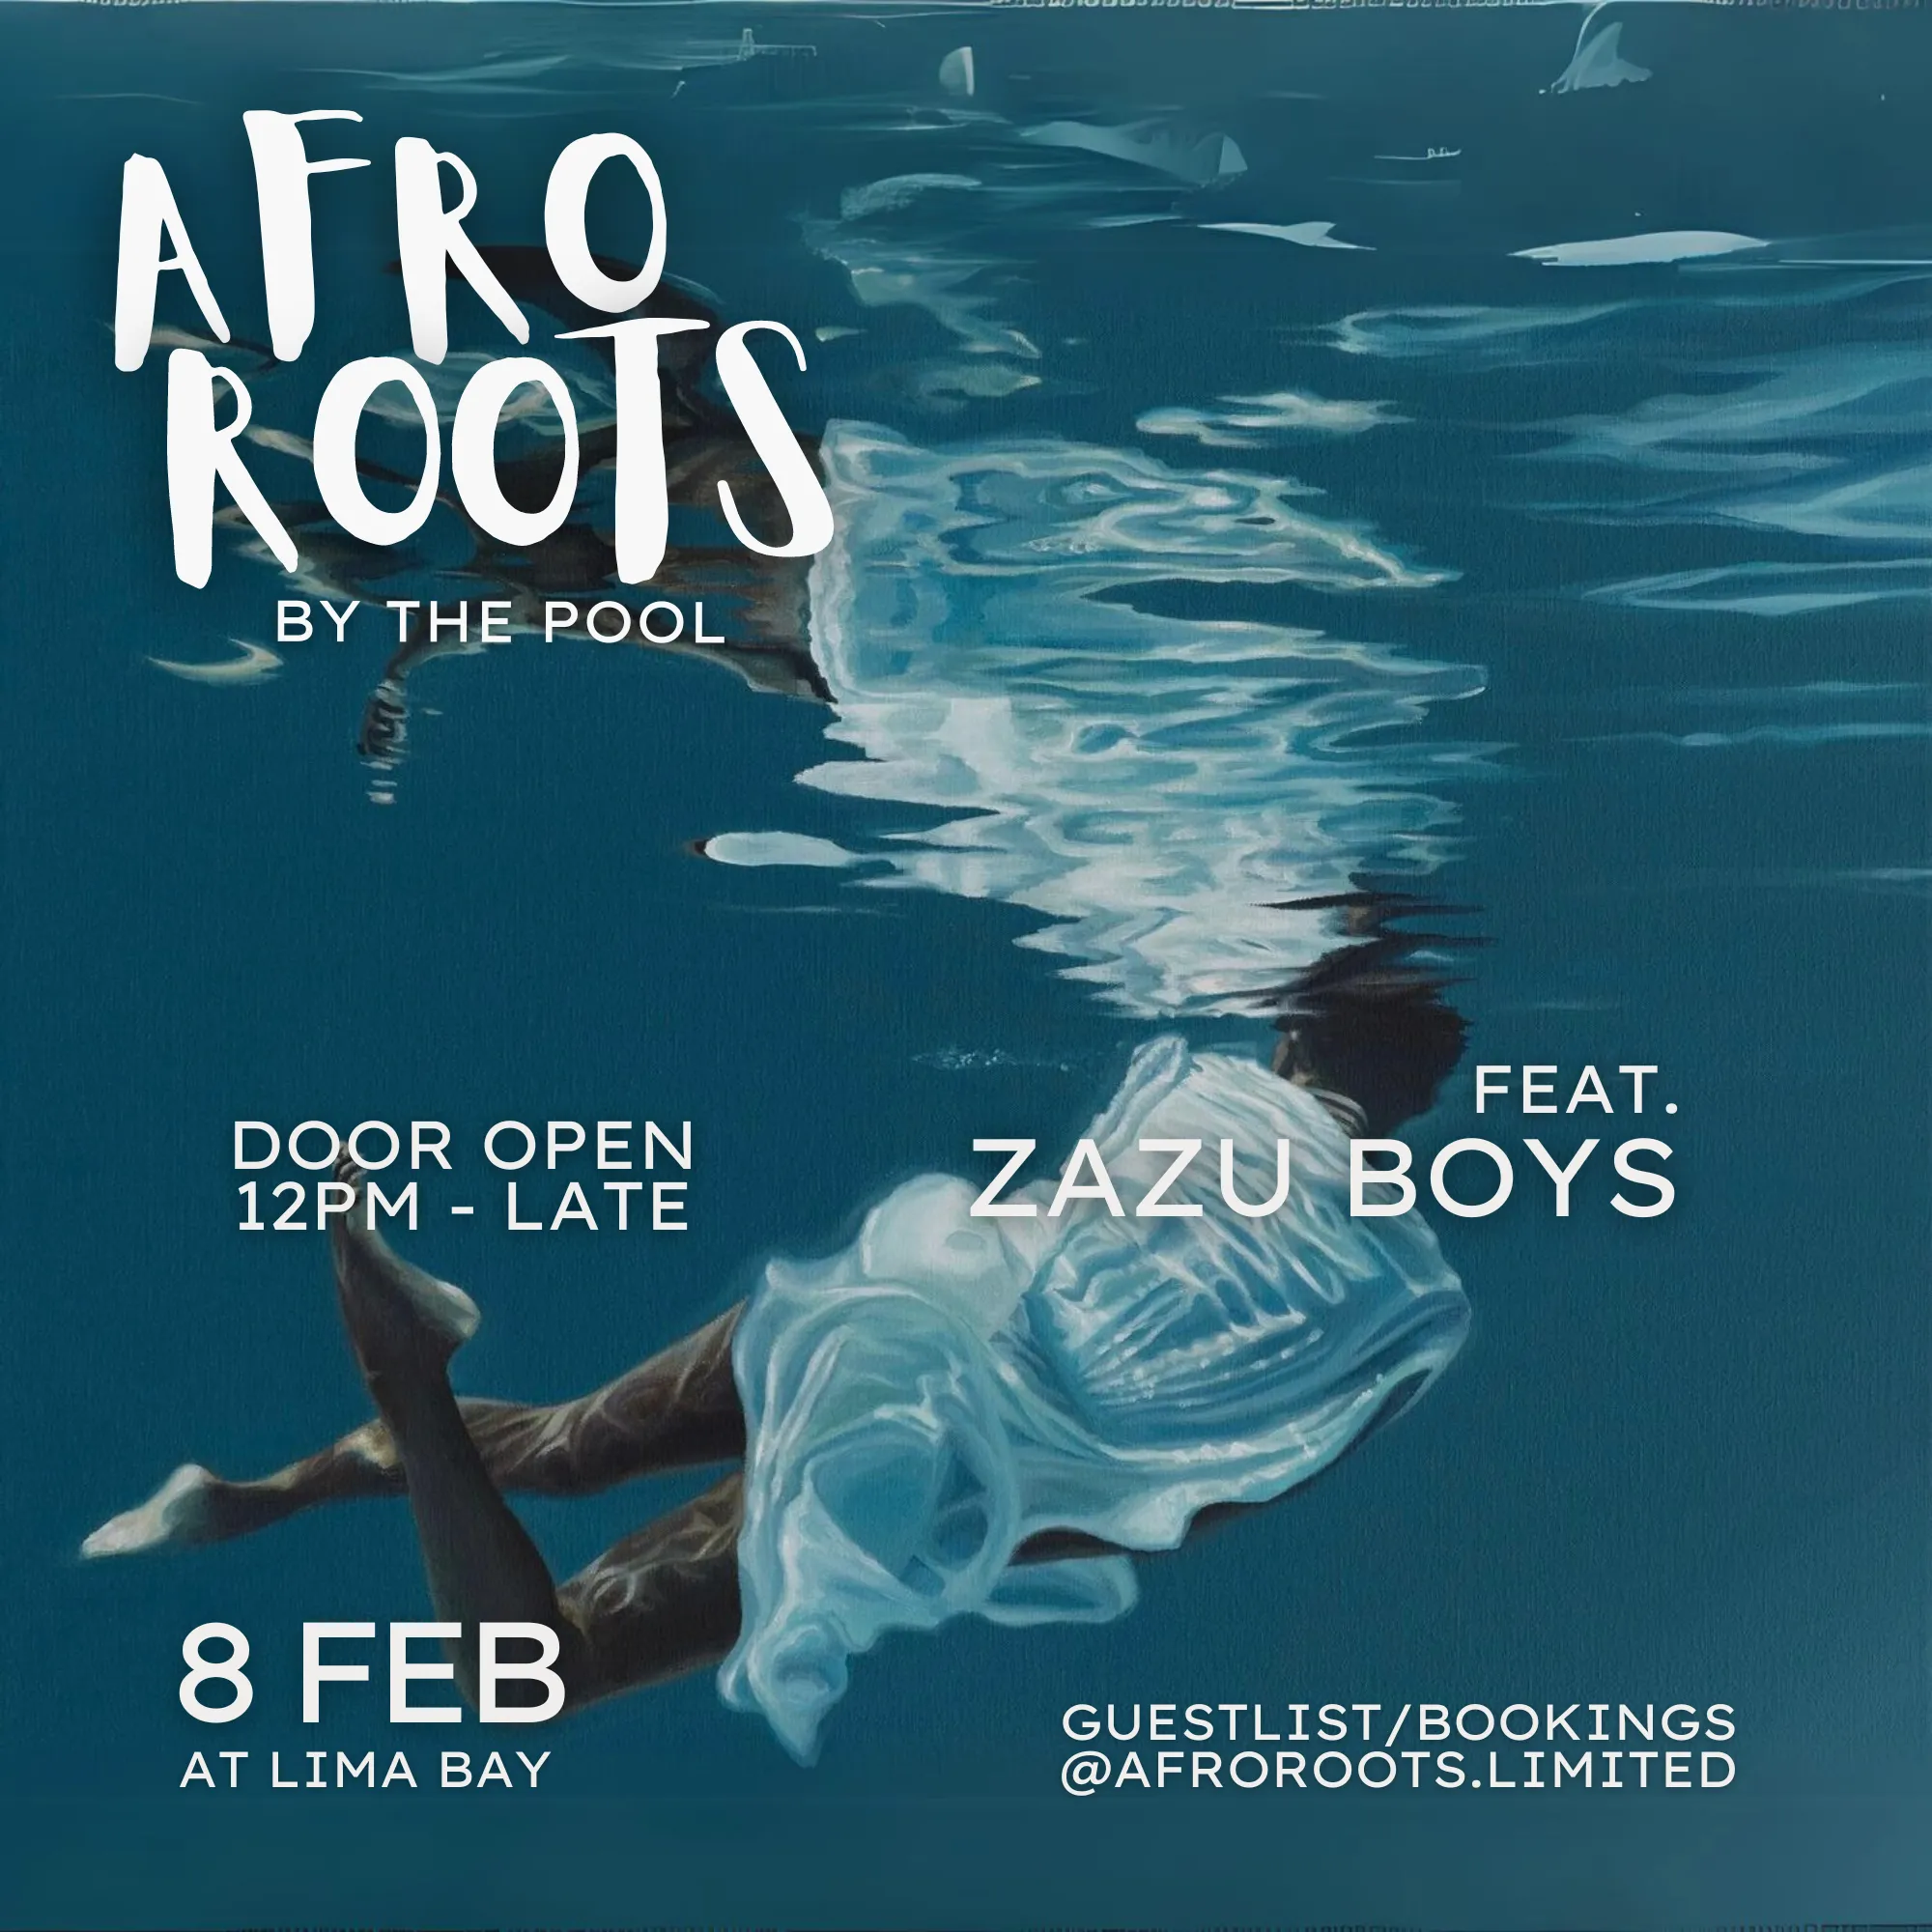 Drink Afro Roots by The Pool 13549